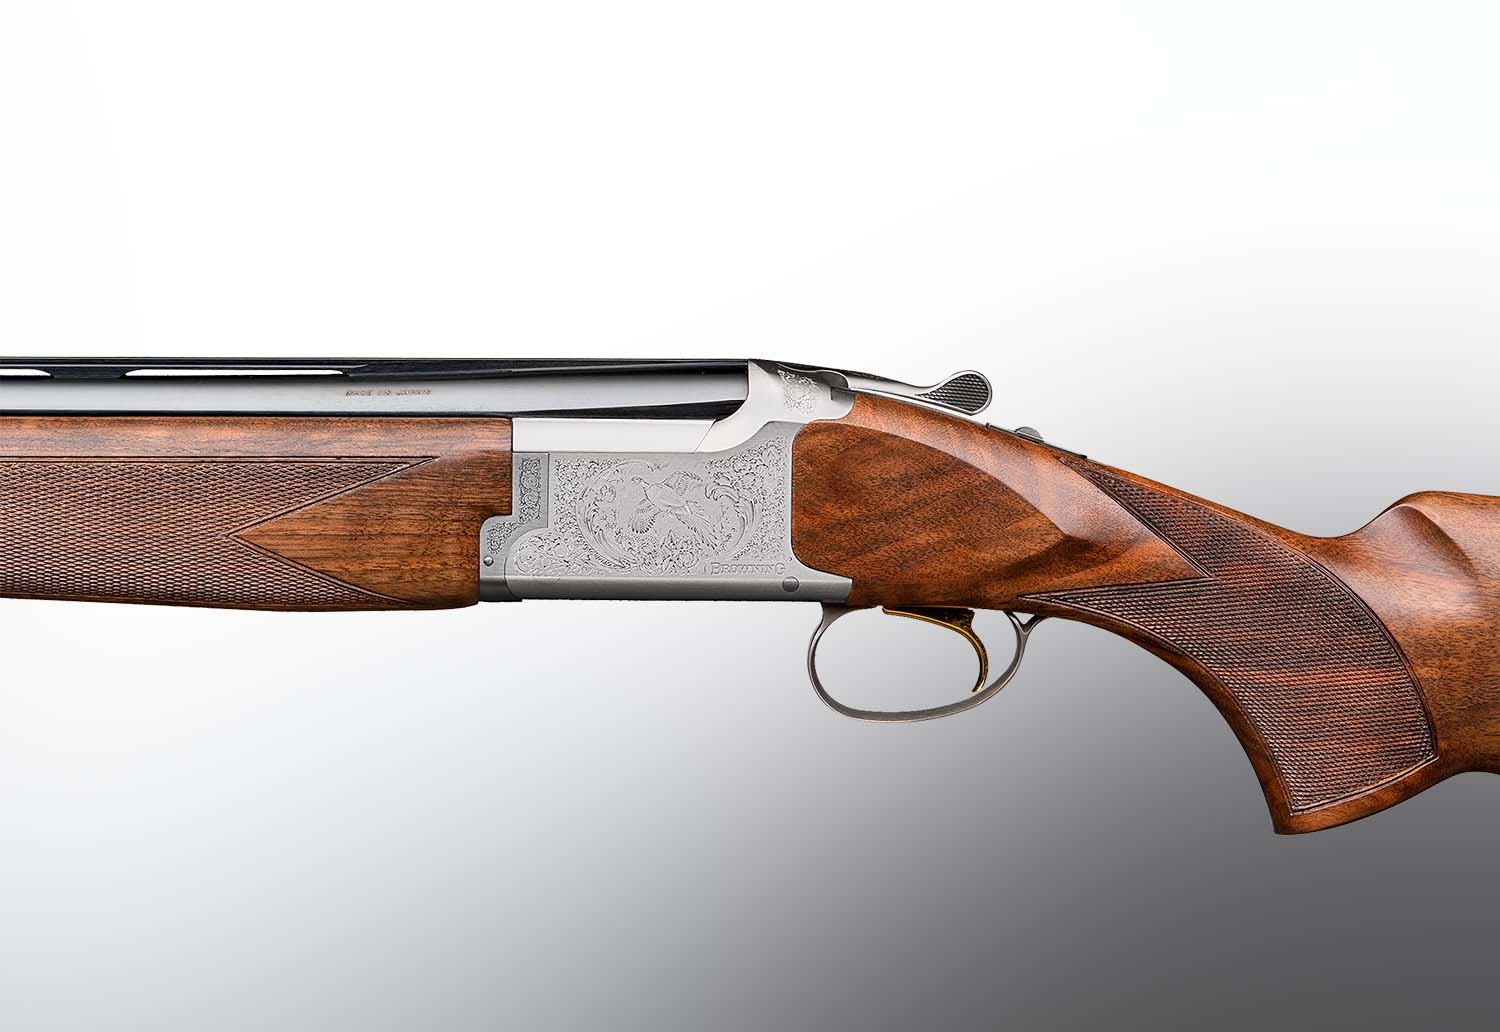 Browning B525 Game One Light in gauge, a lightweight and shotgun all4shooters